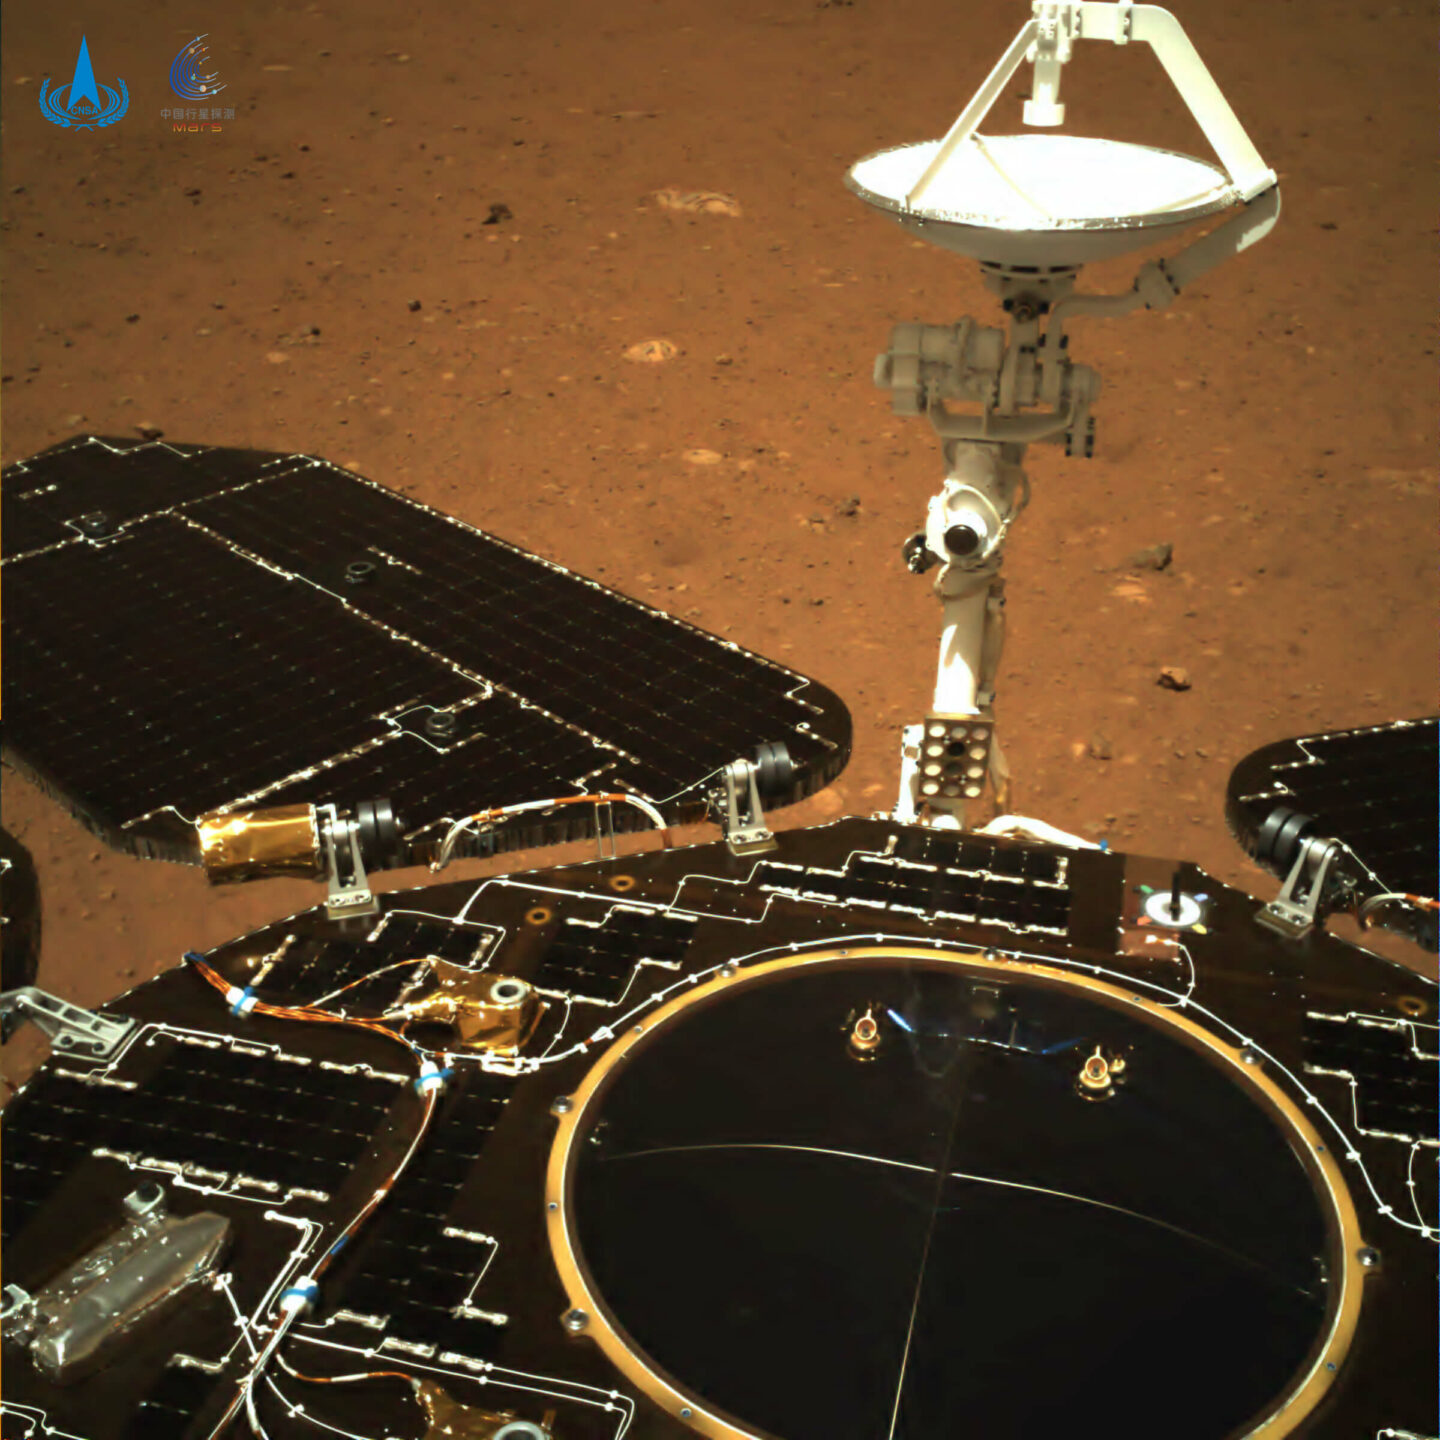 A machine with wings and a satellite. It is black. There is red soil in the background. this is not an image of the time when the sound recording sent back by zhurong was taken